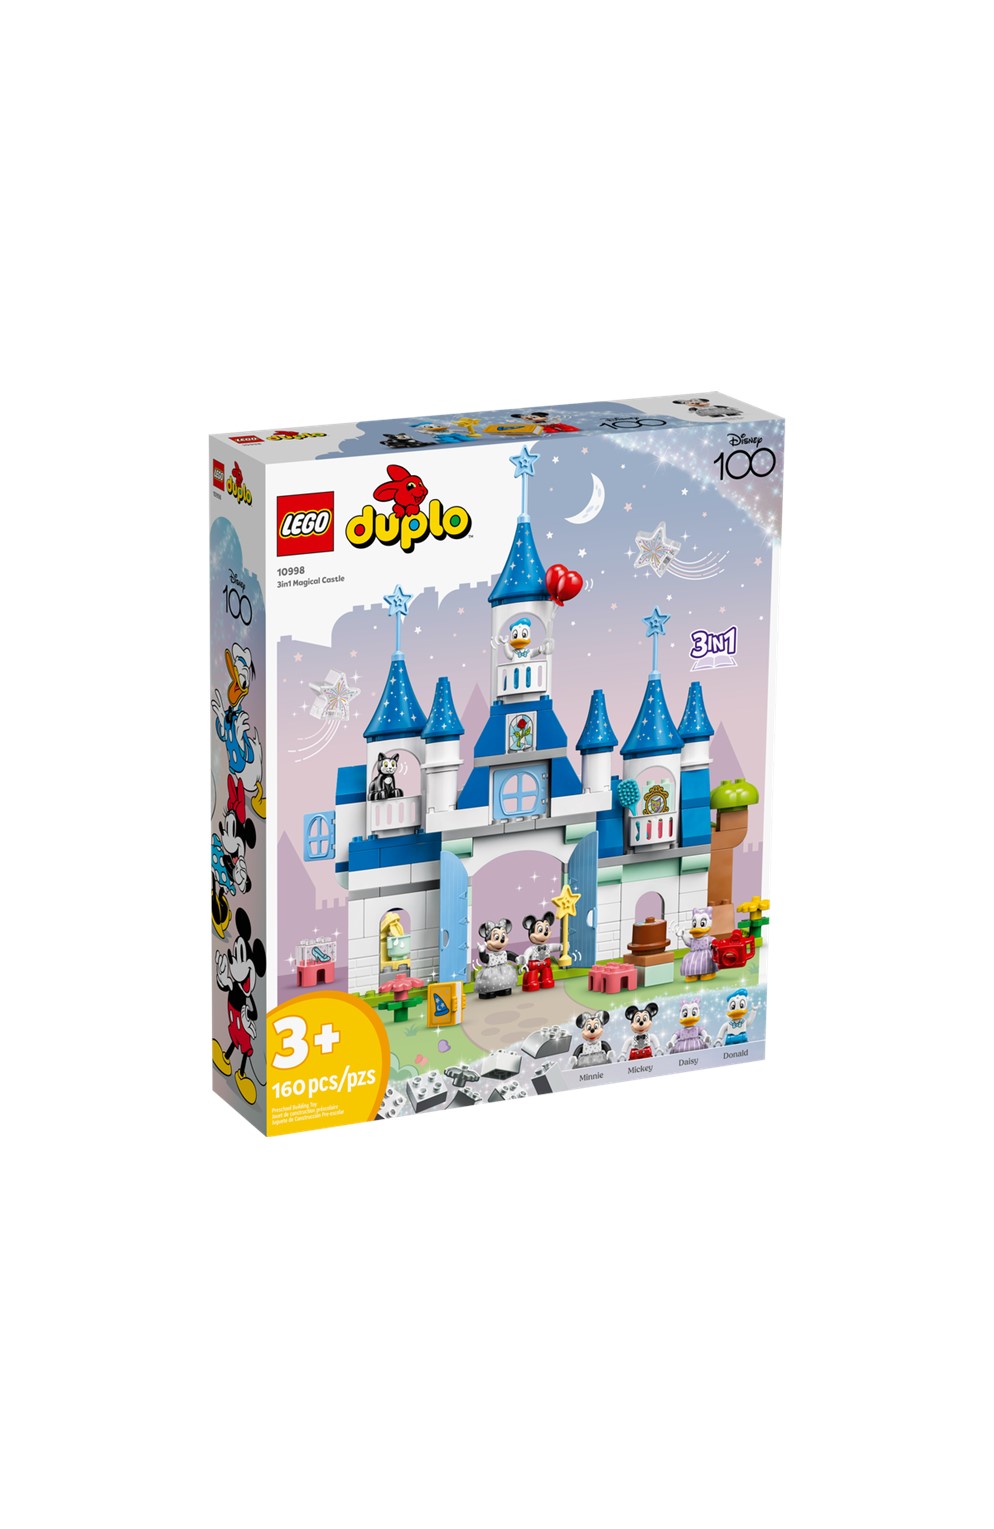 10998 3-In-1 Magical Castle